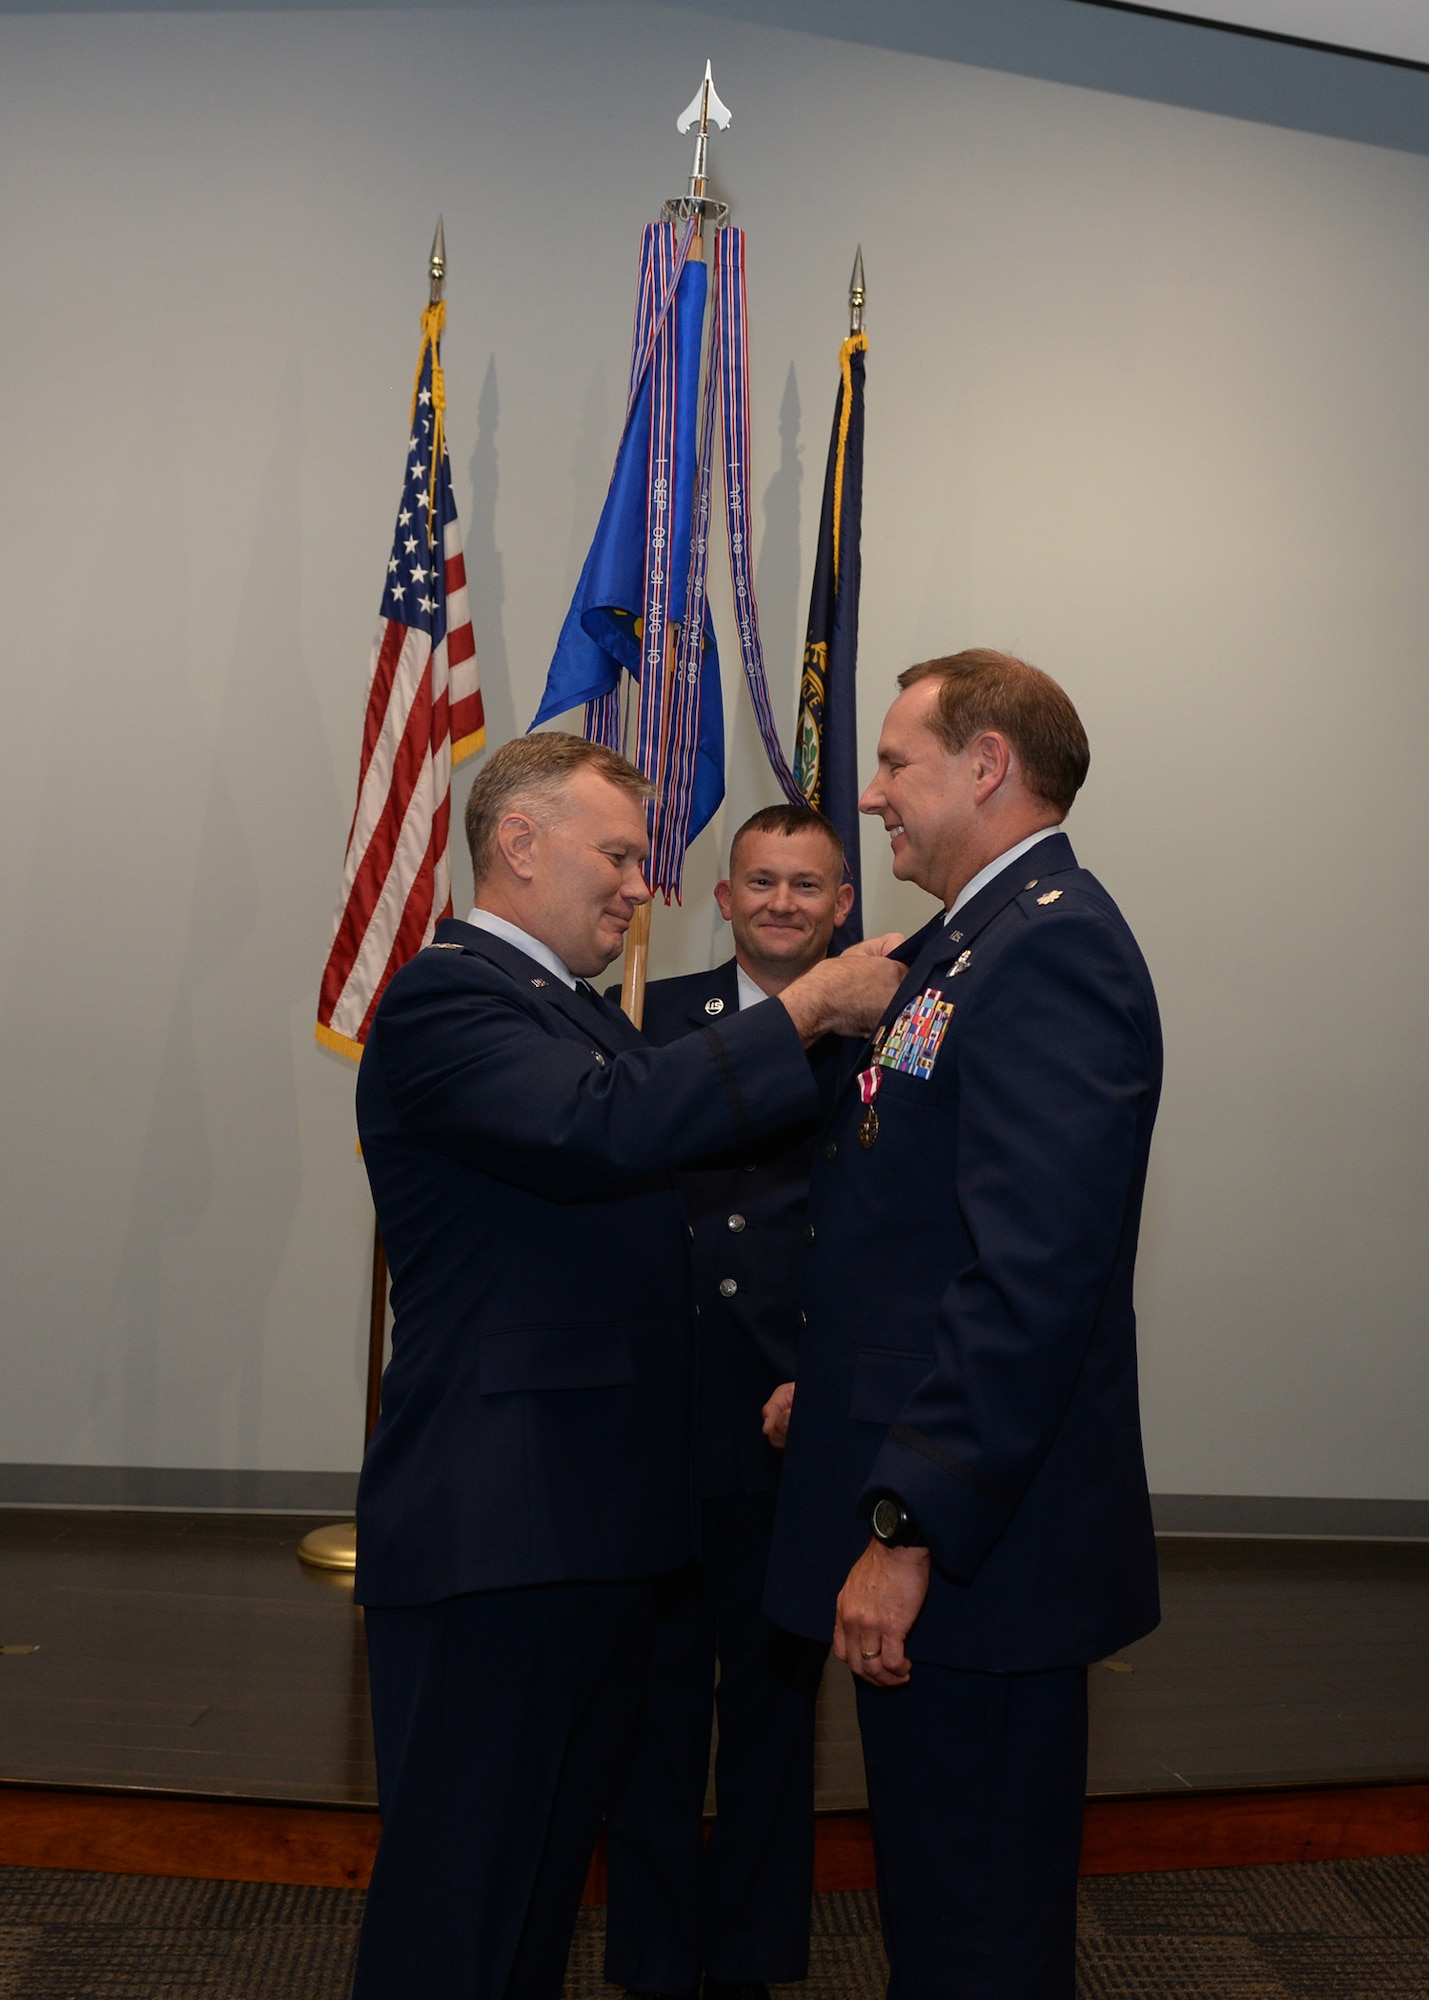 Col. John Pogorek, commander of the 157th Operations Group, left, pins a commander's pin on Lt. Col. Mark Ustaszewski, incoming commander of the 157th Operations Support Squadron during a change command ceremony as Master Sgt. Jason Veziris holds the 157th OSS unit guidon, Oct. 14, 2017,  Pease Air National Guard Base, N.H. Lt. Col. Ustaszewski replaces outgoing 157th OSS commander Lt. Col. Jeffery Cole, who served as the commander for two years and will be the new deputy commander for the 157th OG. (N.H. Air National Guard photo by Airman Victoria Nelson)